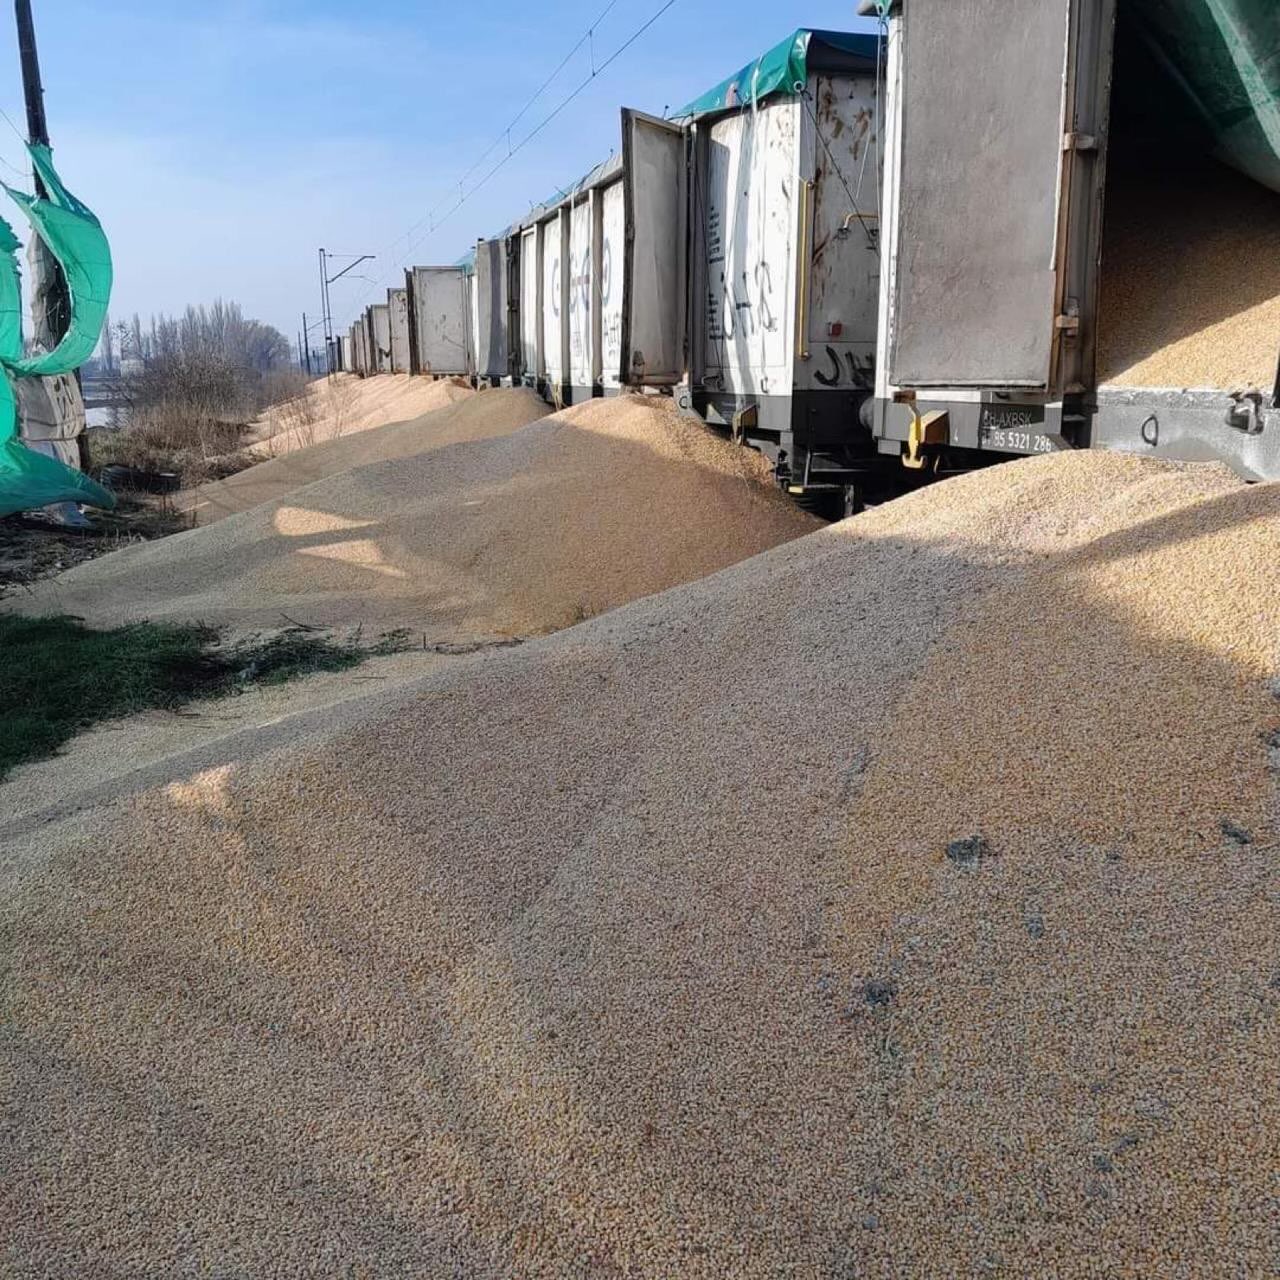 Tensions grow as 160 tons of Ukrainian grain destroyed in Poland